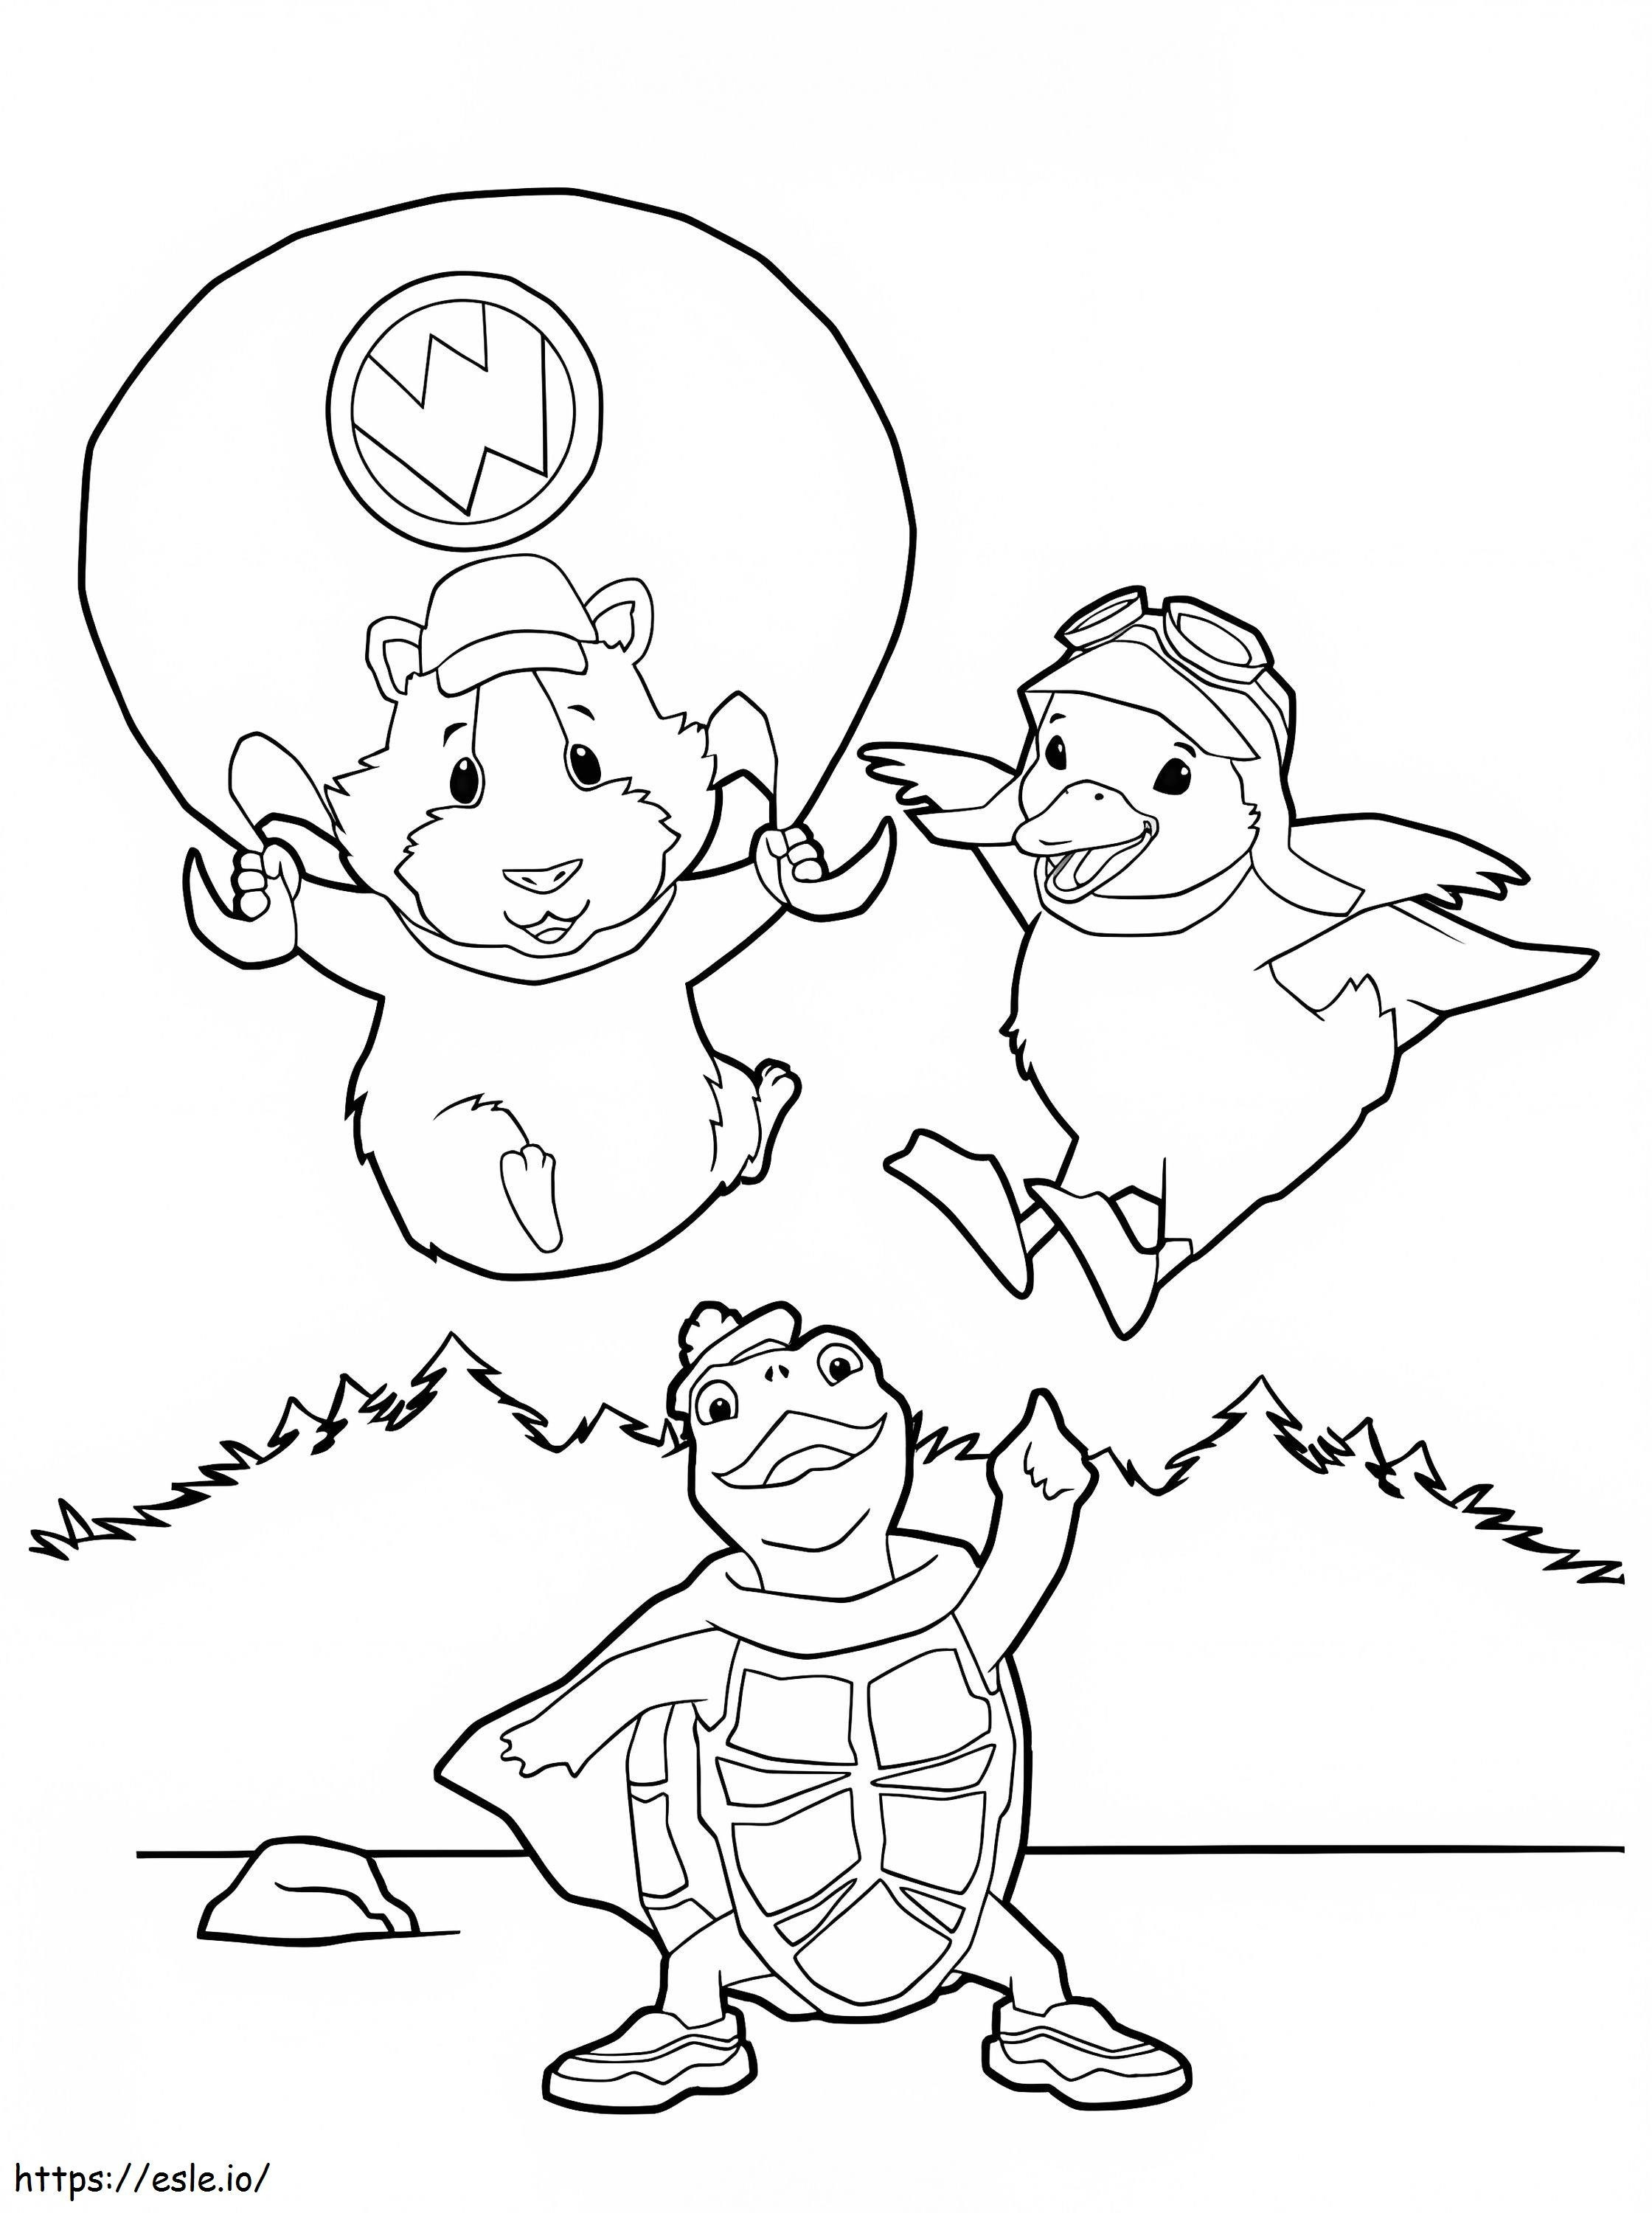 Meet The Wonderful Pets coloring page